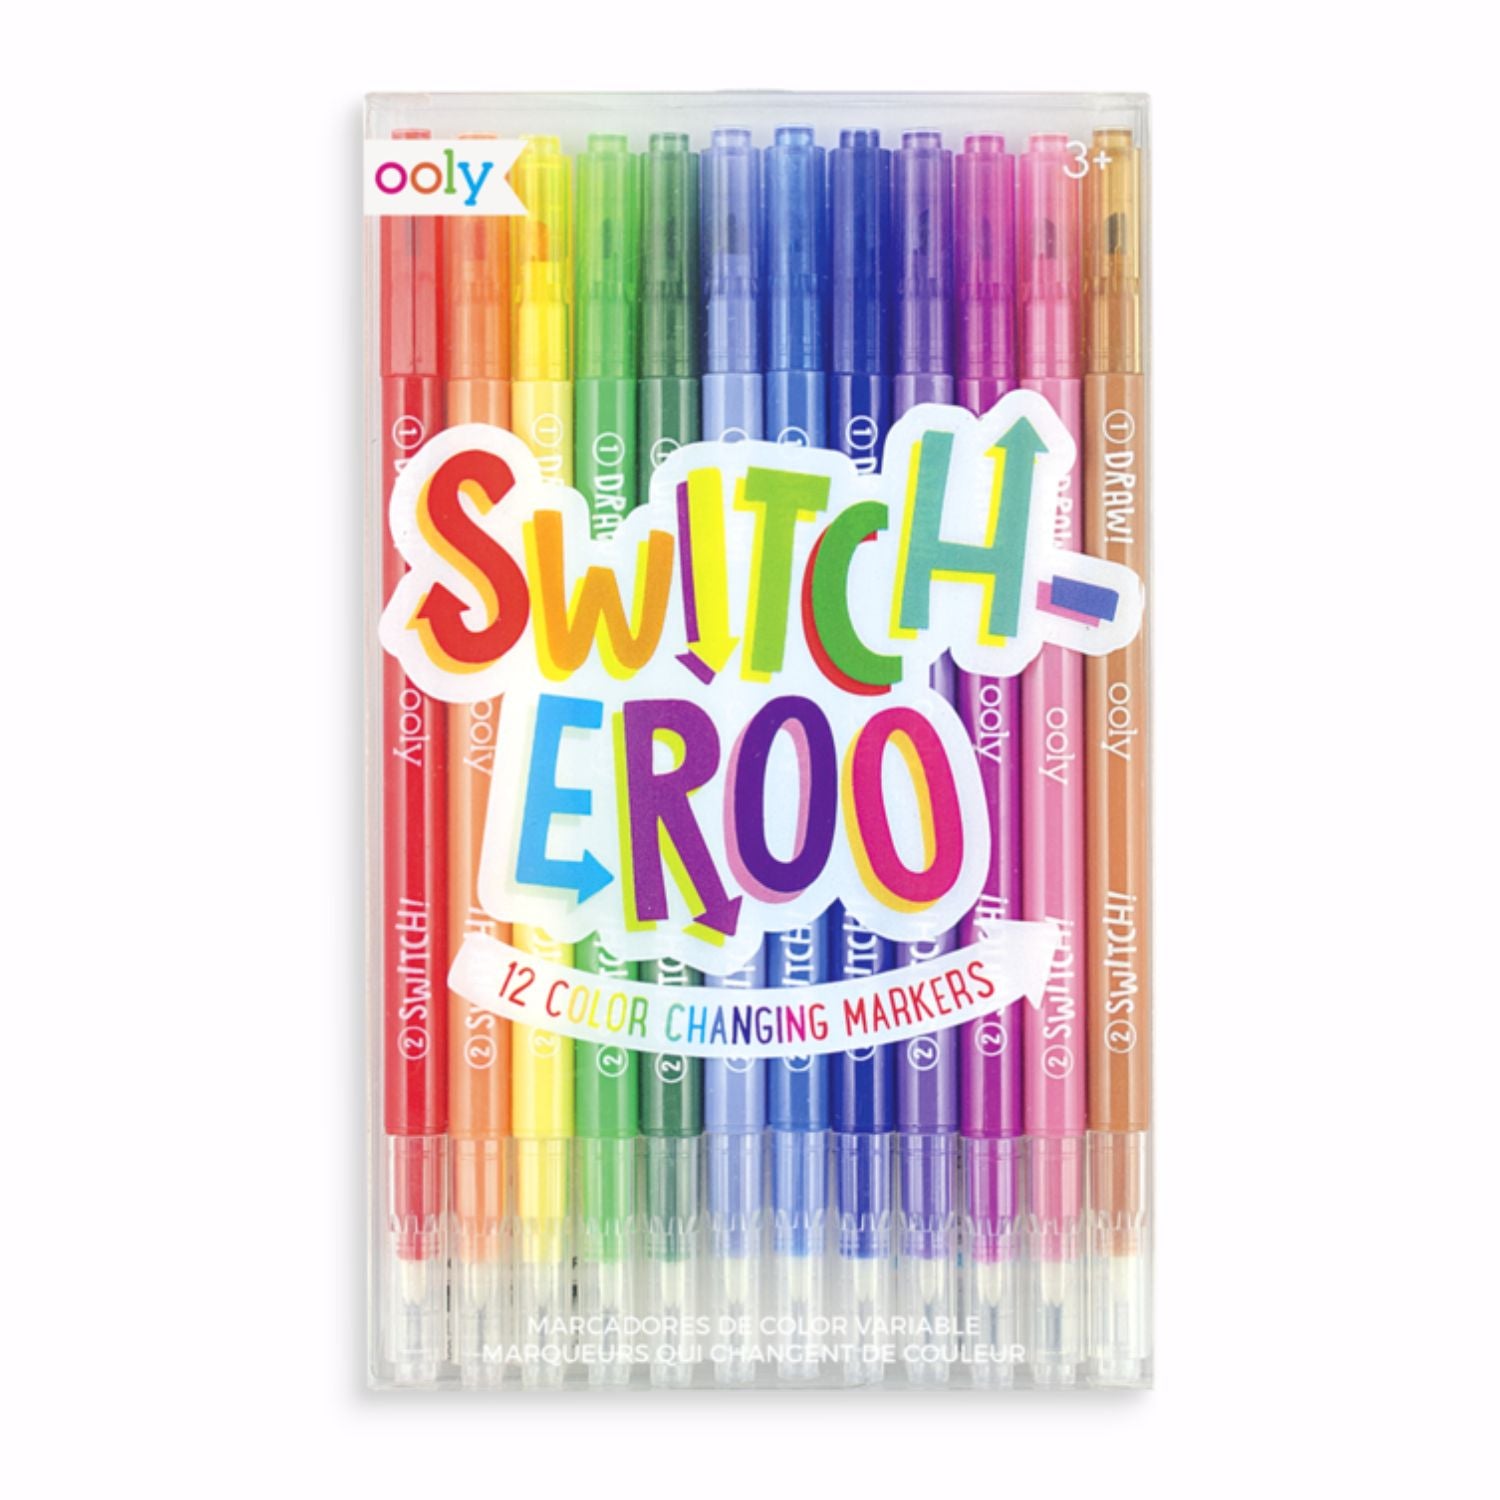 OOLY Switch-Eroo! 2.0 Color-Changing Marker Set 